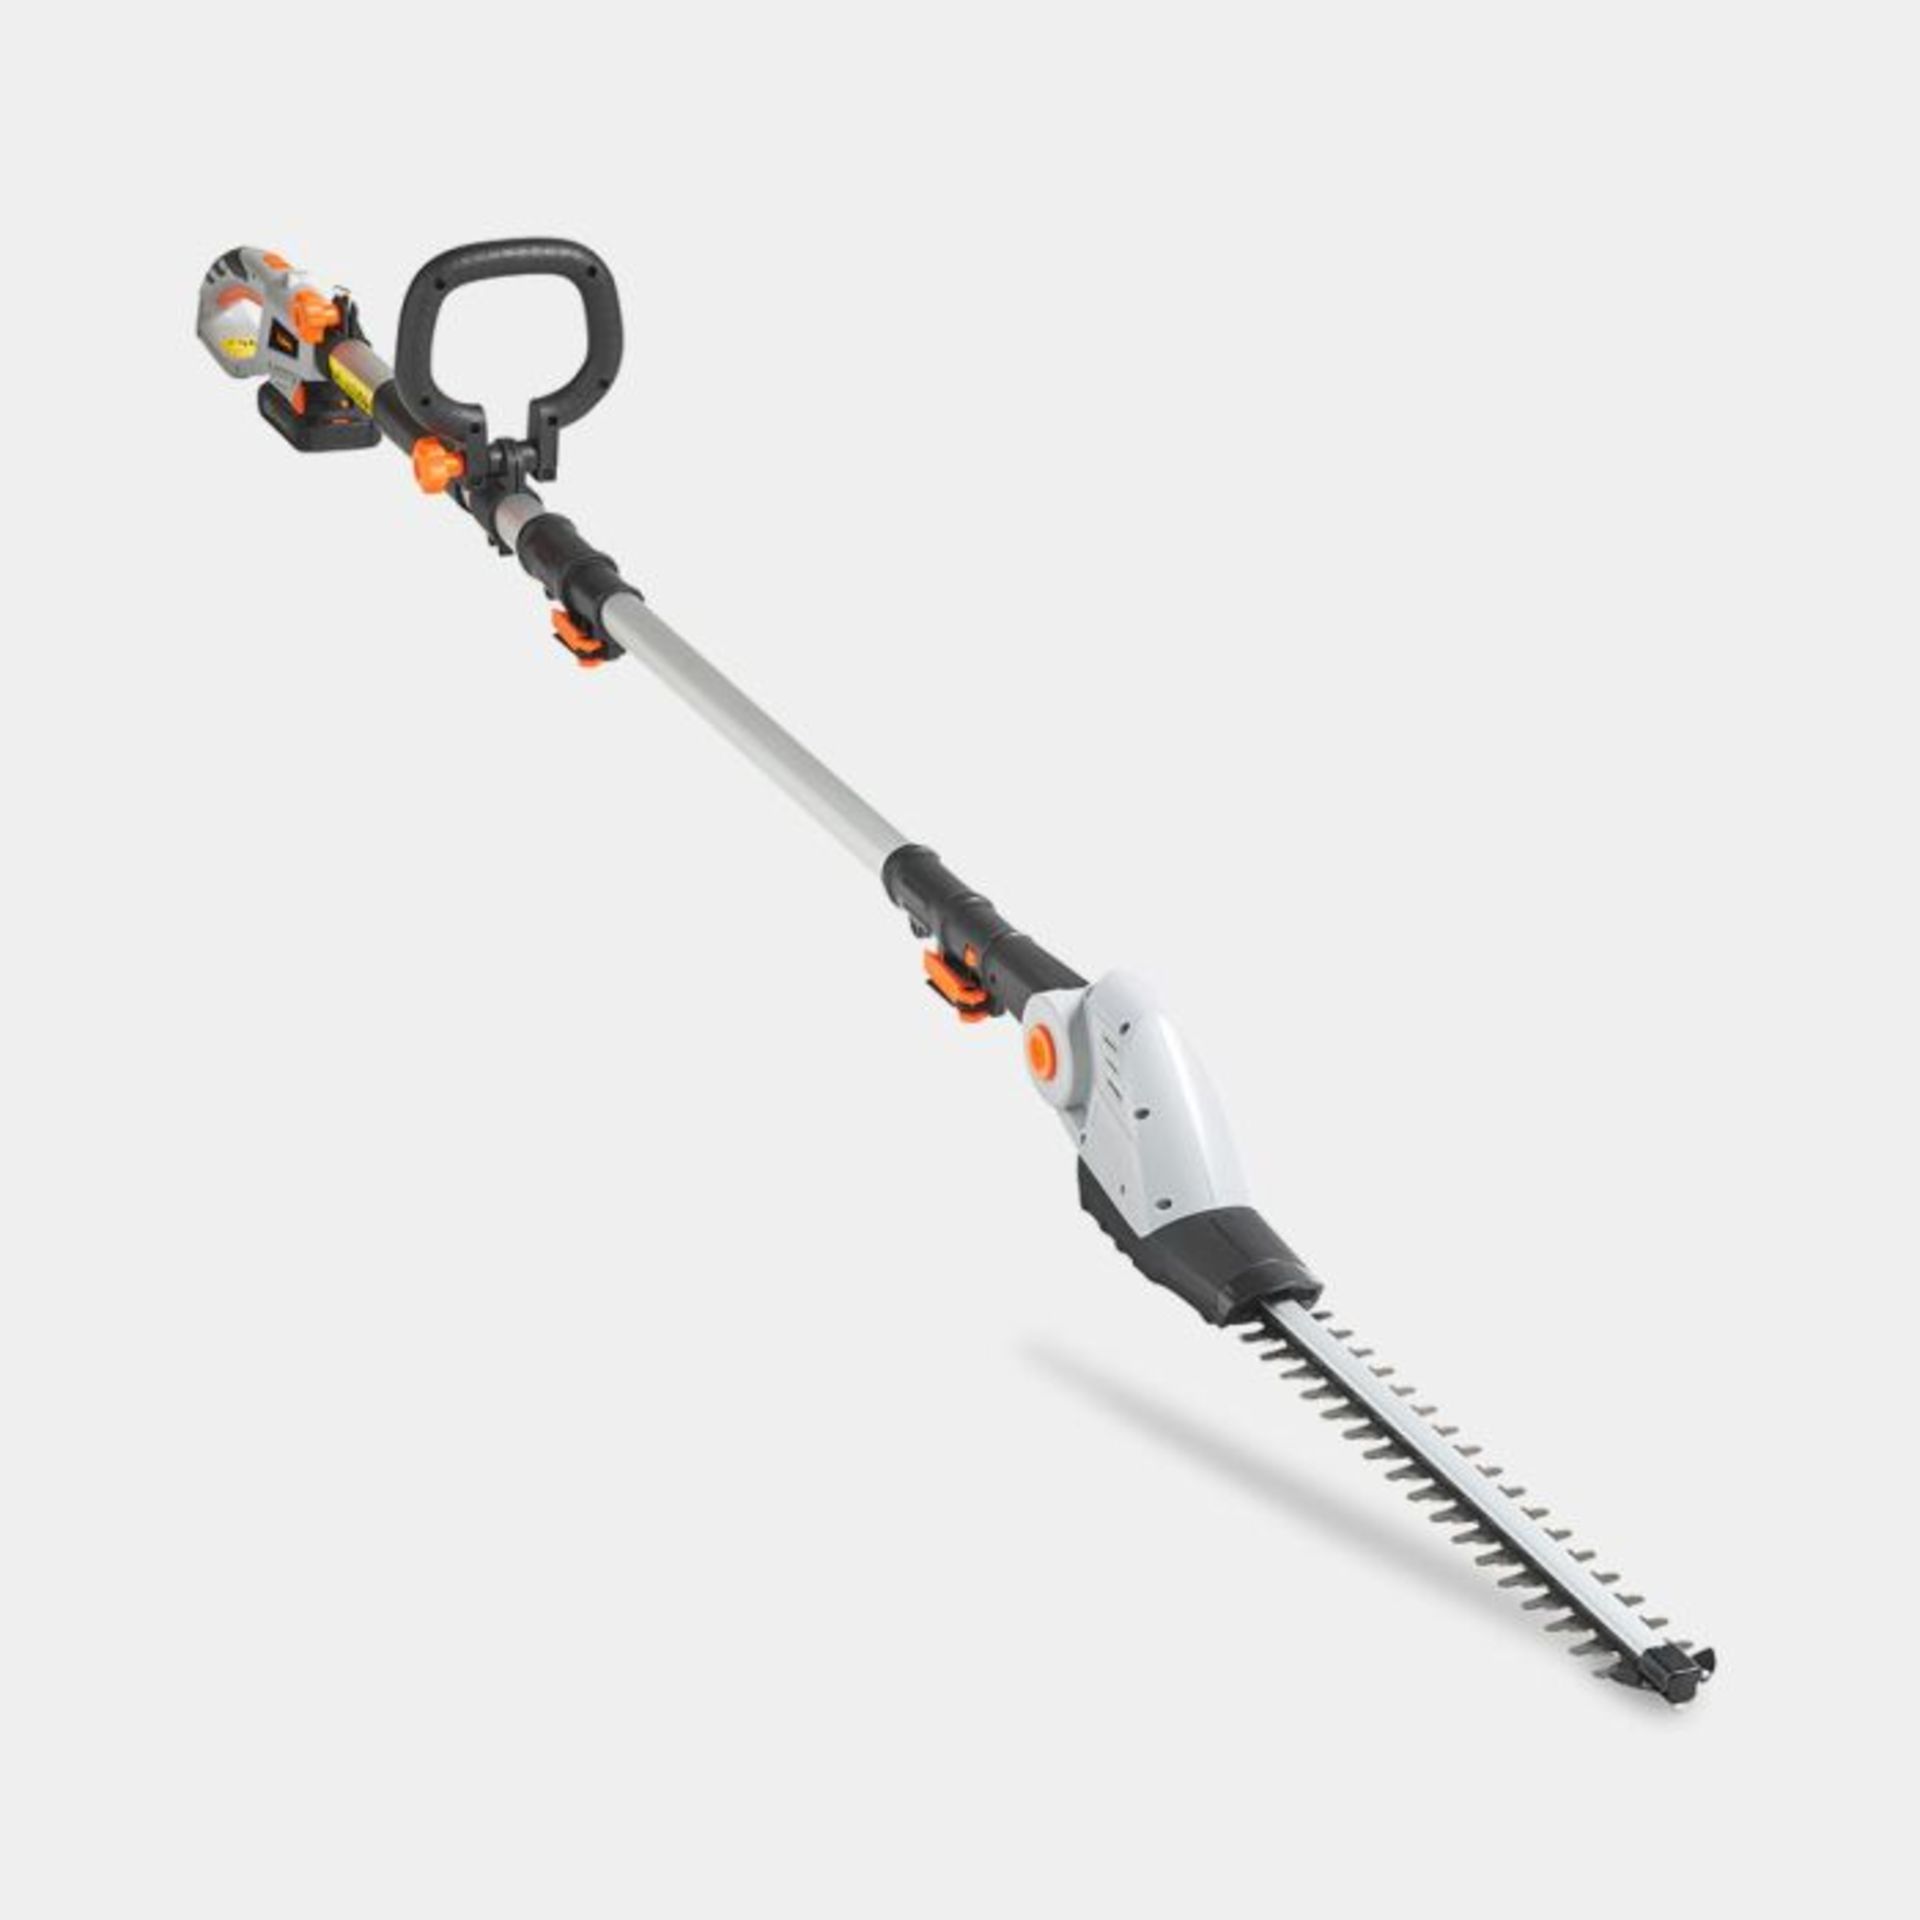 G-series Cordless Pole Trimmer. - ER36. Cut hedges quickly and conveniently with the VonHaus 20V